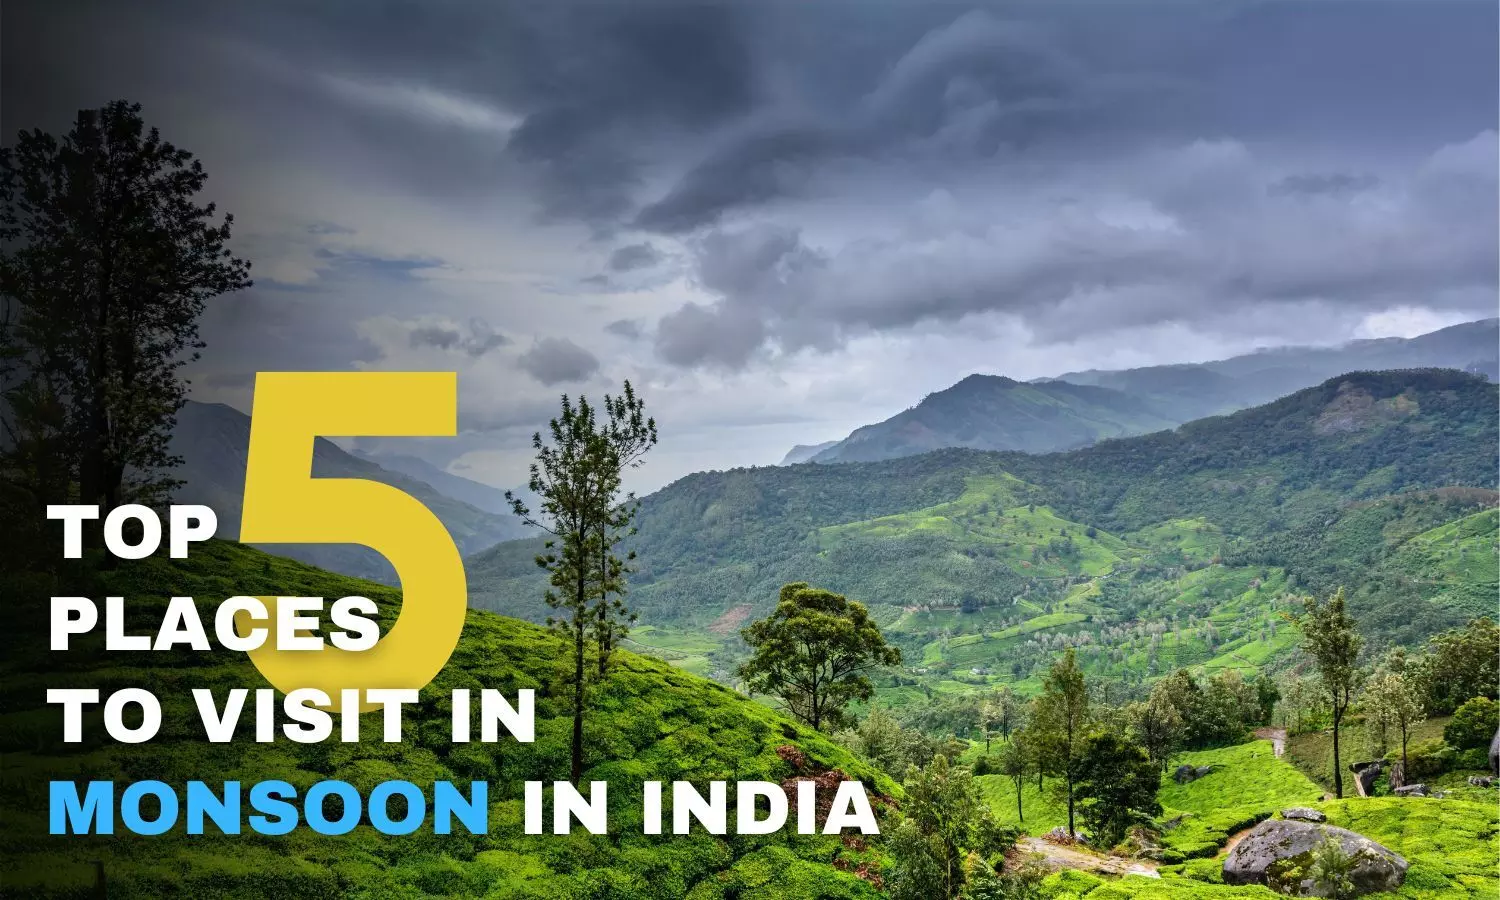 Top 5 Places to Visit in Monsoons in India